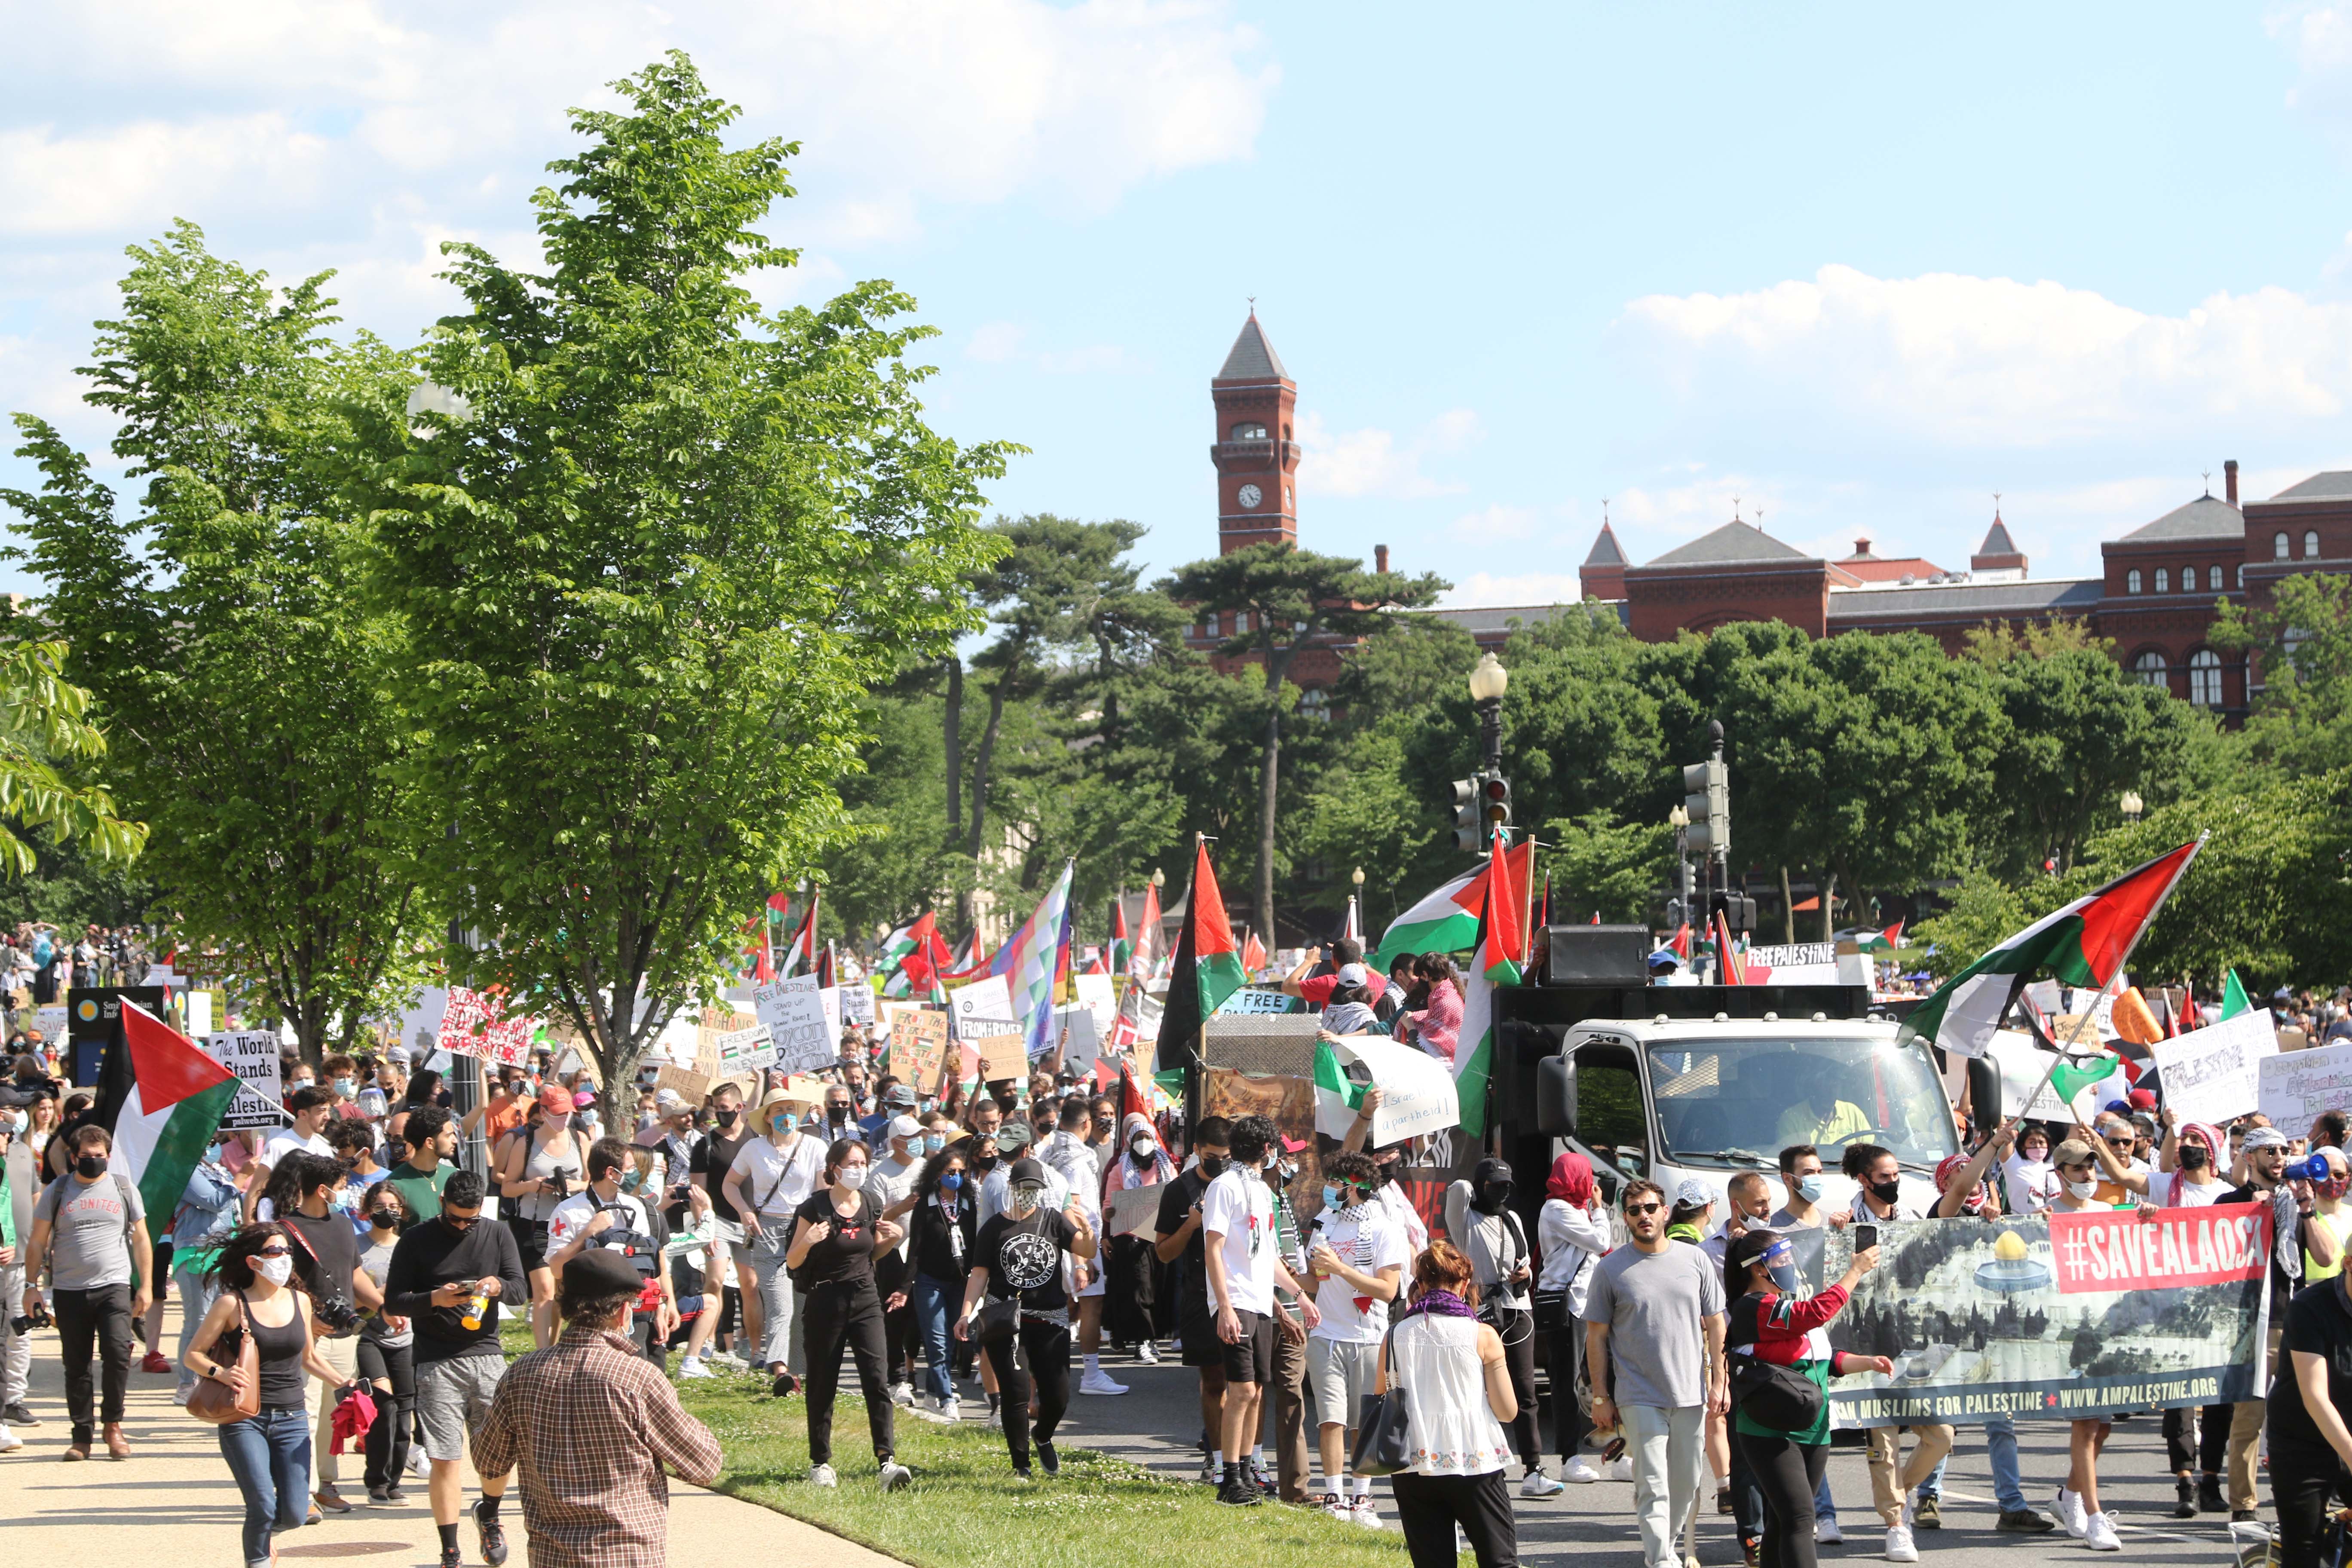 Demonstrators march in the street in downtown Washington DC, near the Washington Monument, on 15 May 2021.